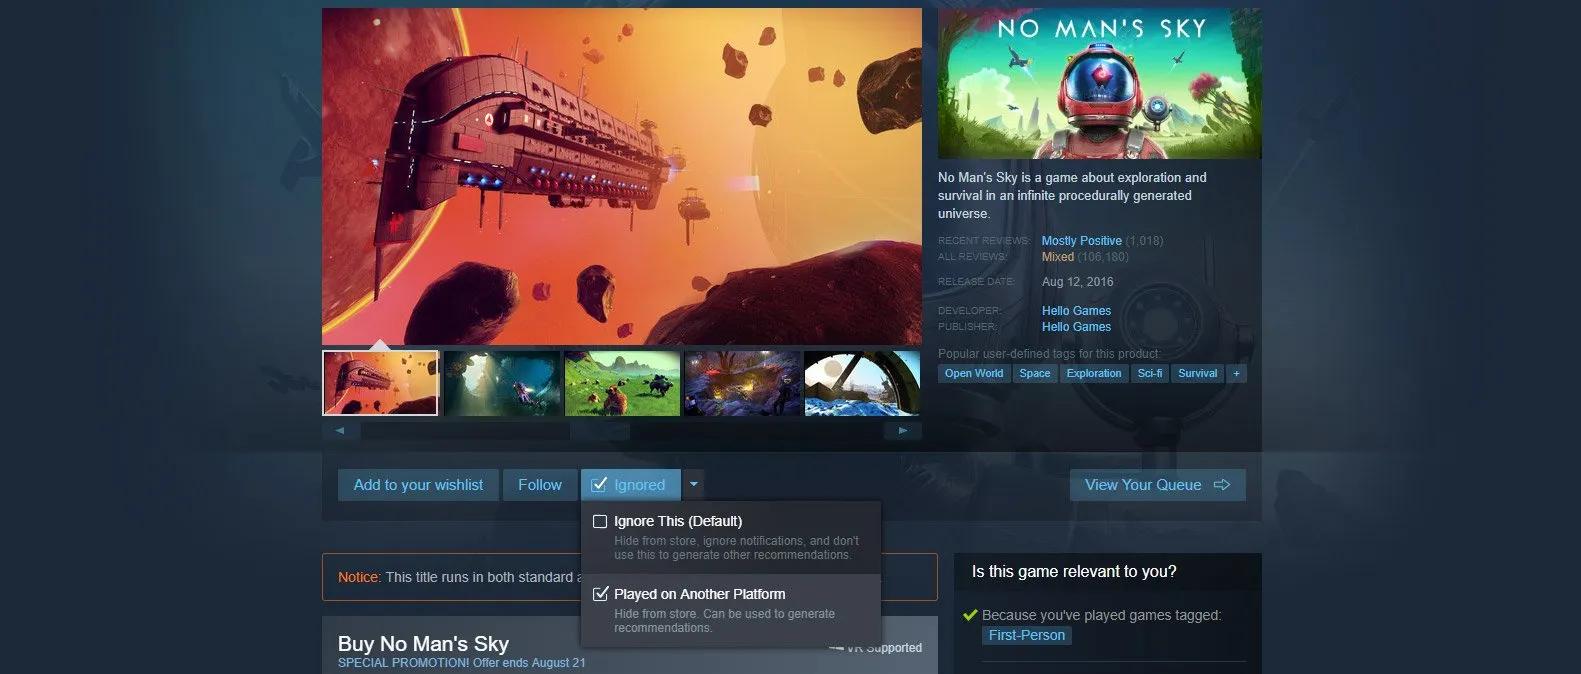 Steam Is Reportedly Going to Allow You to Hide a Game From Your